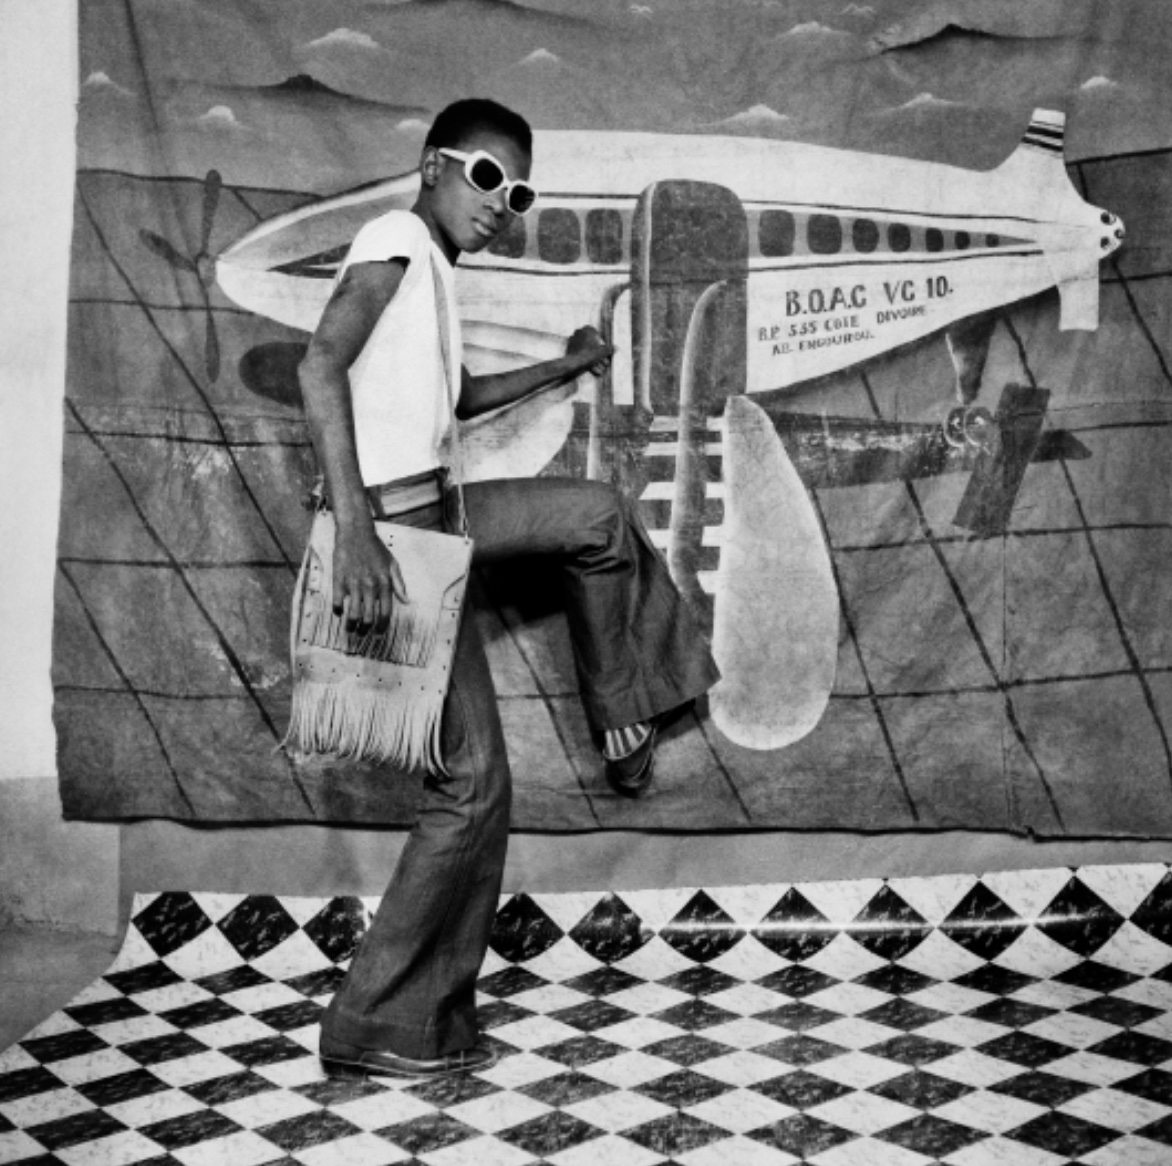 African Artists and the photo studio